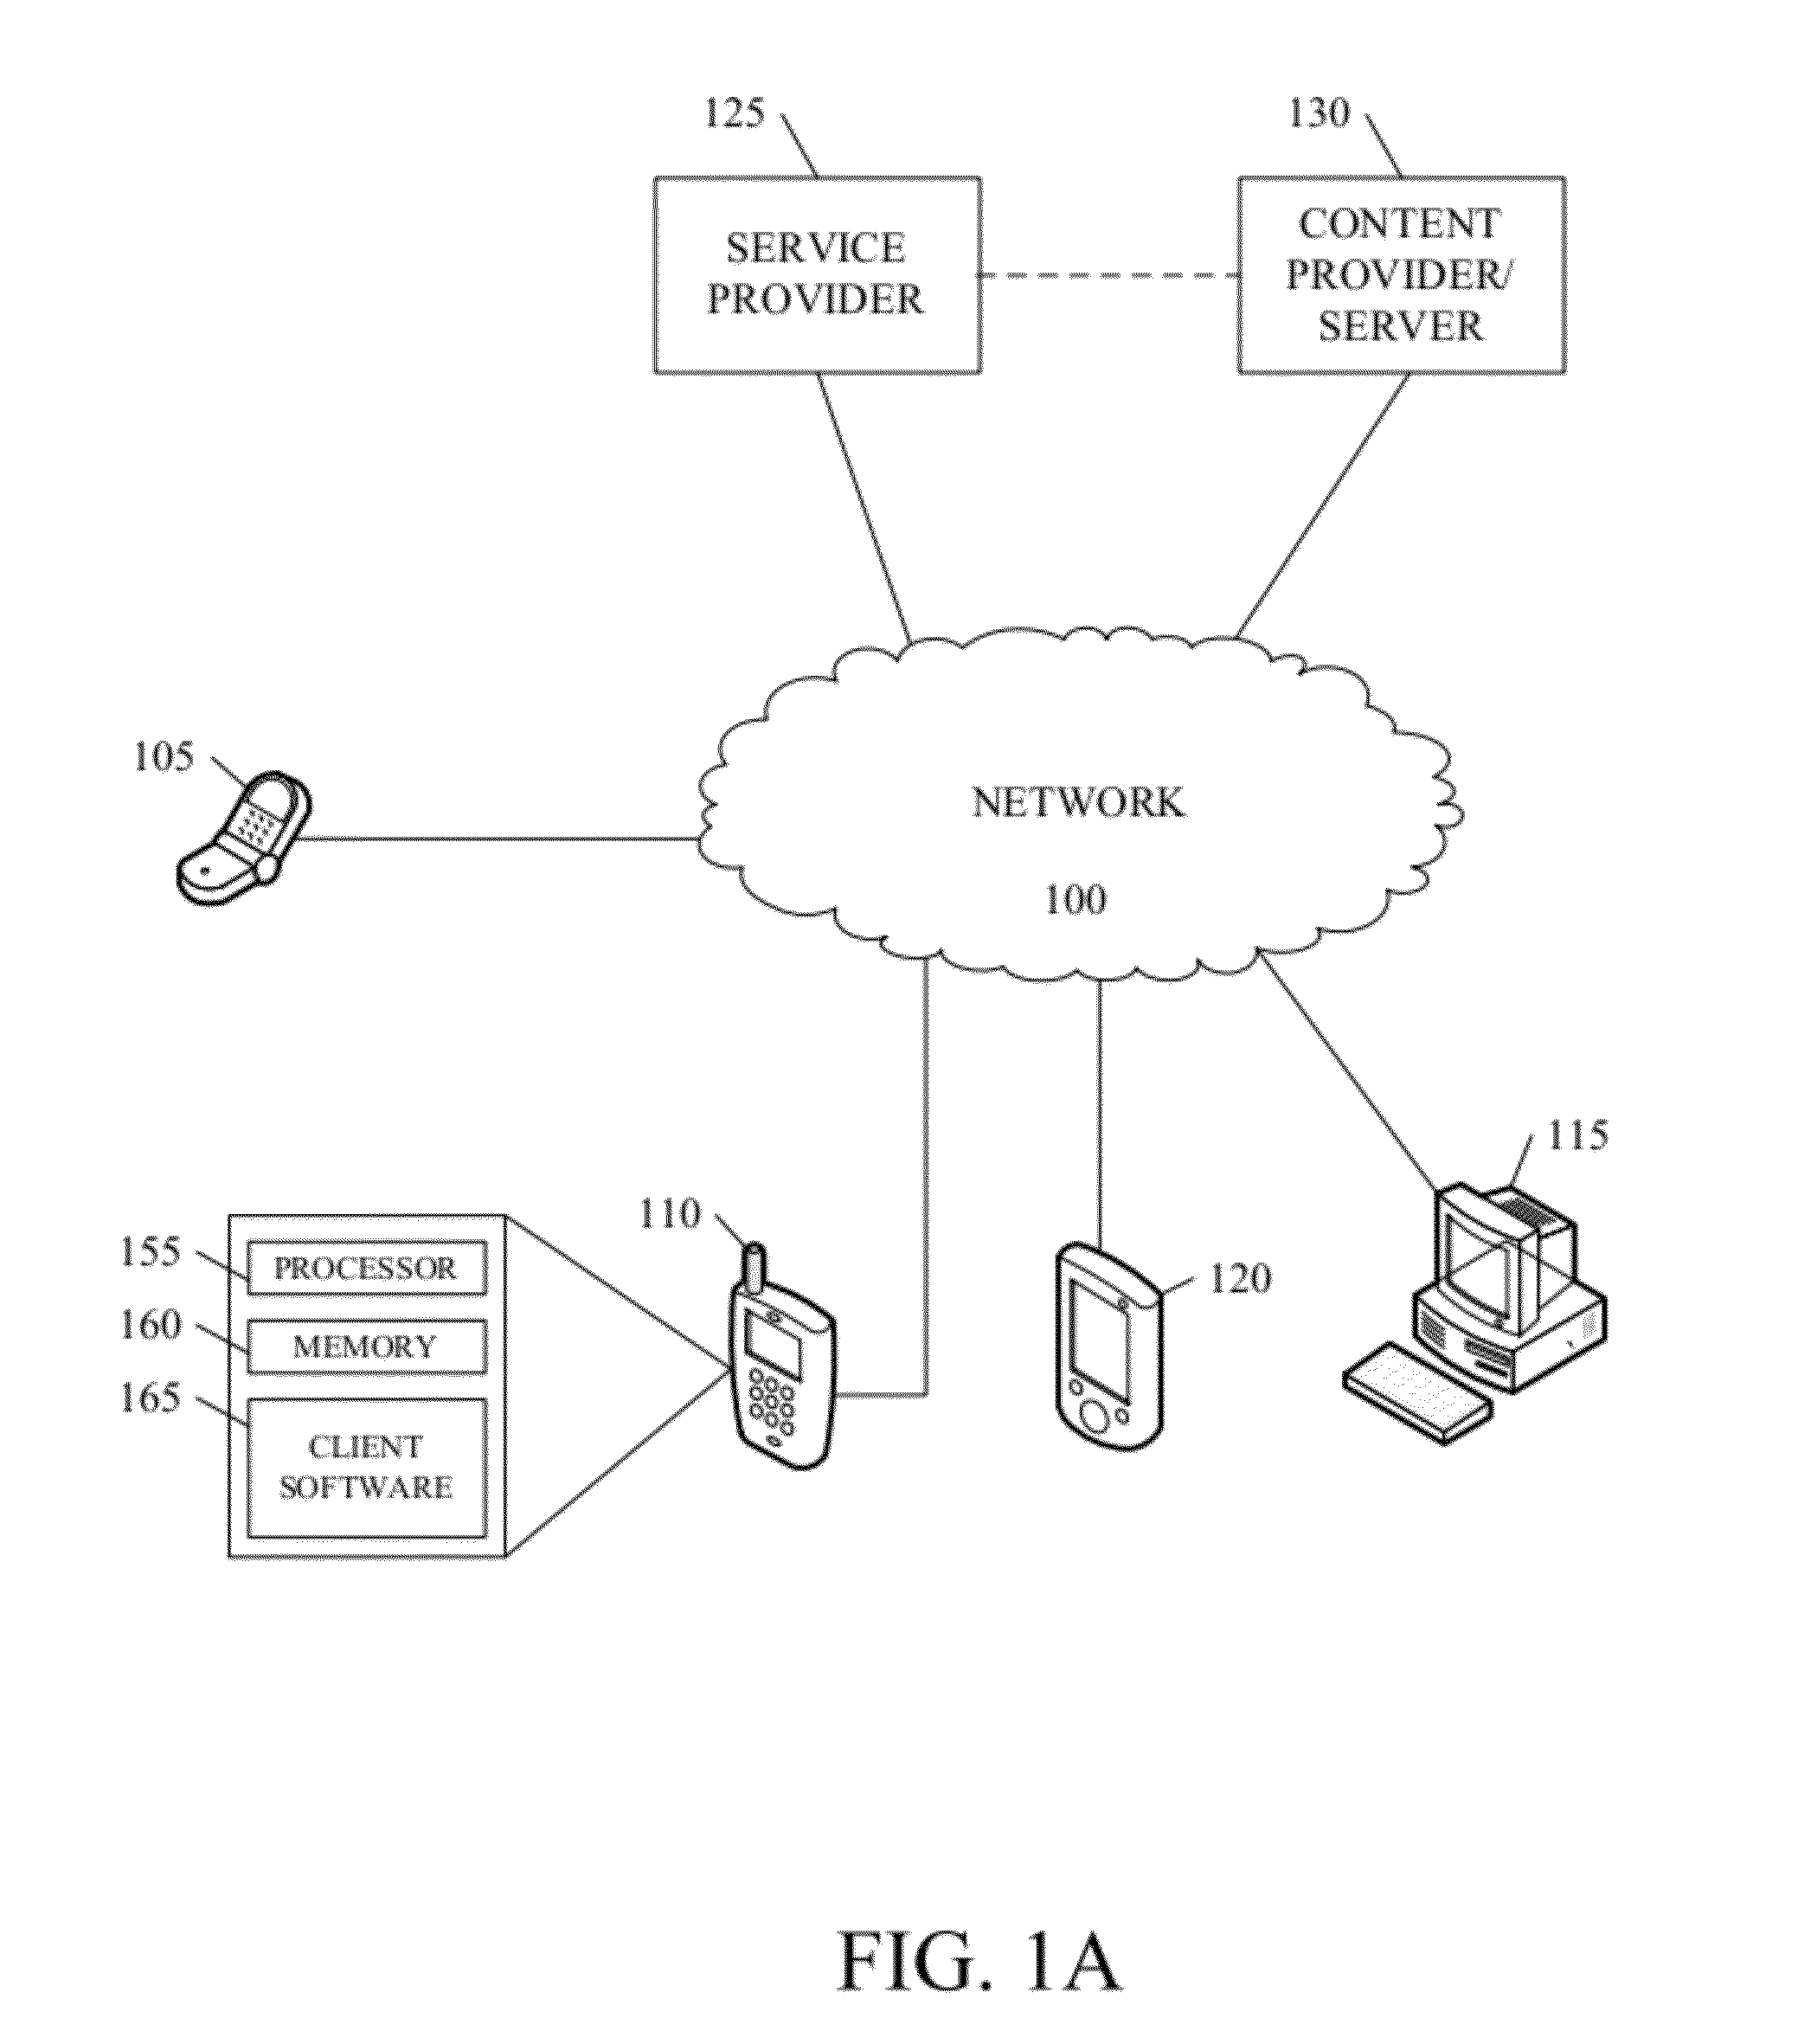 Providing Signaling Information in an Electronic Service Guide